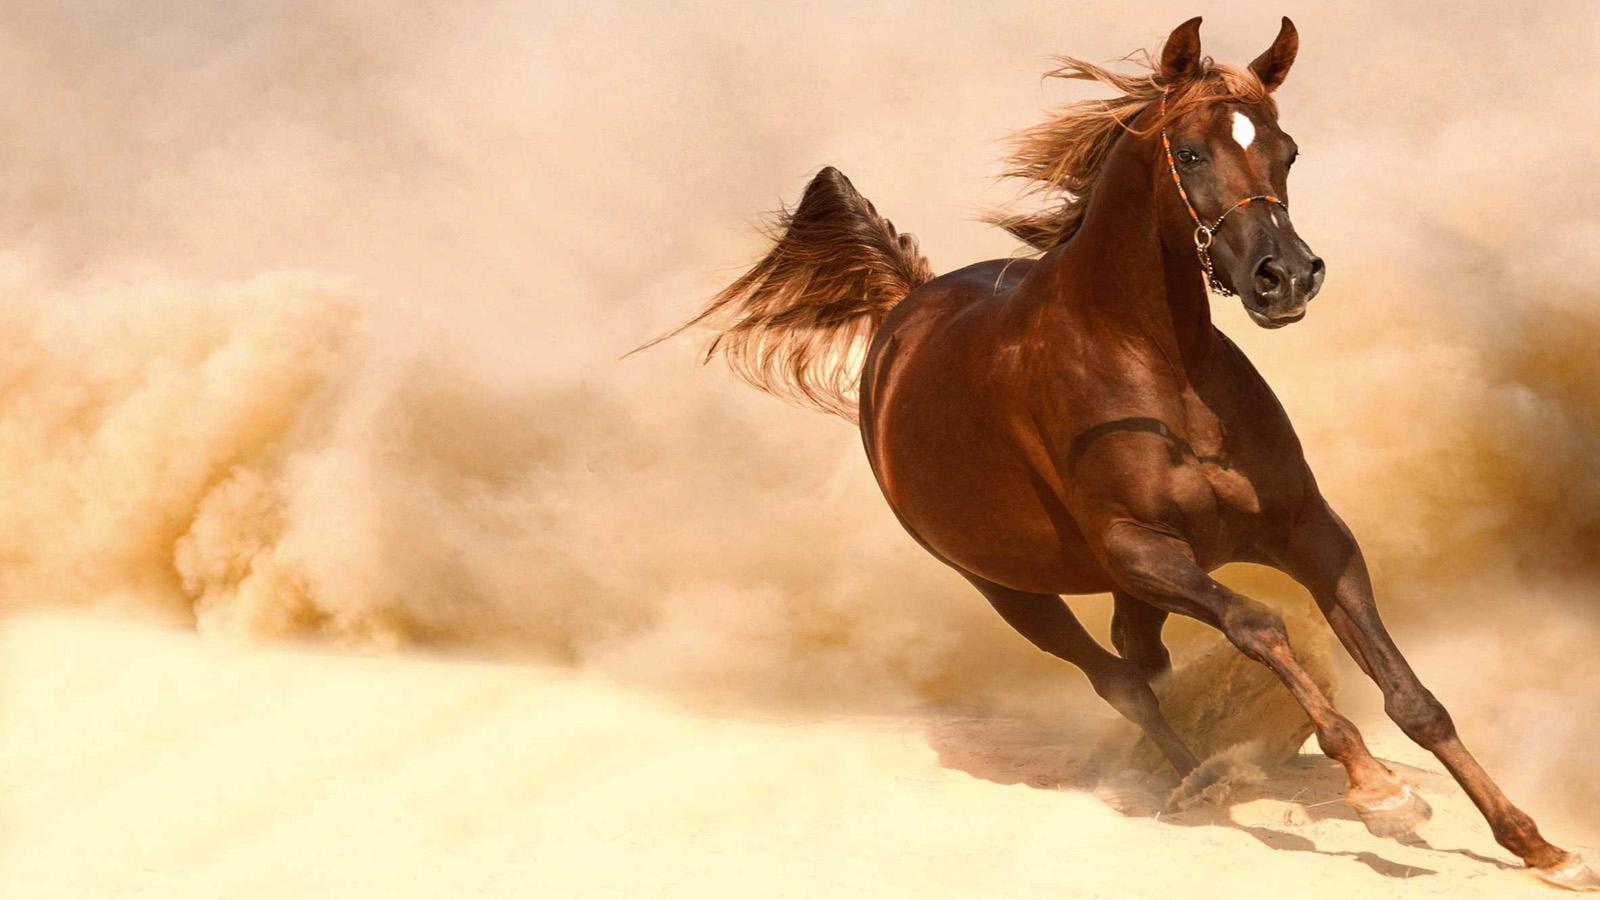 Horse HD Wallpaper Live For Android